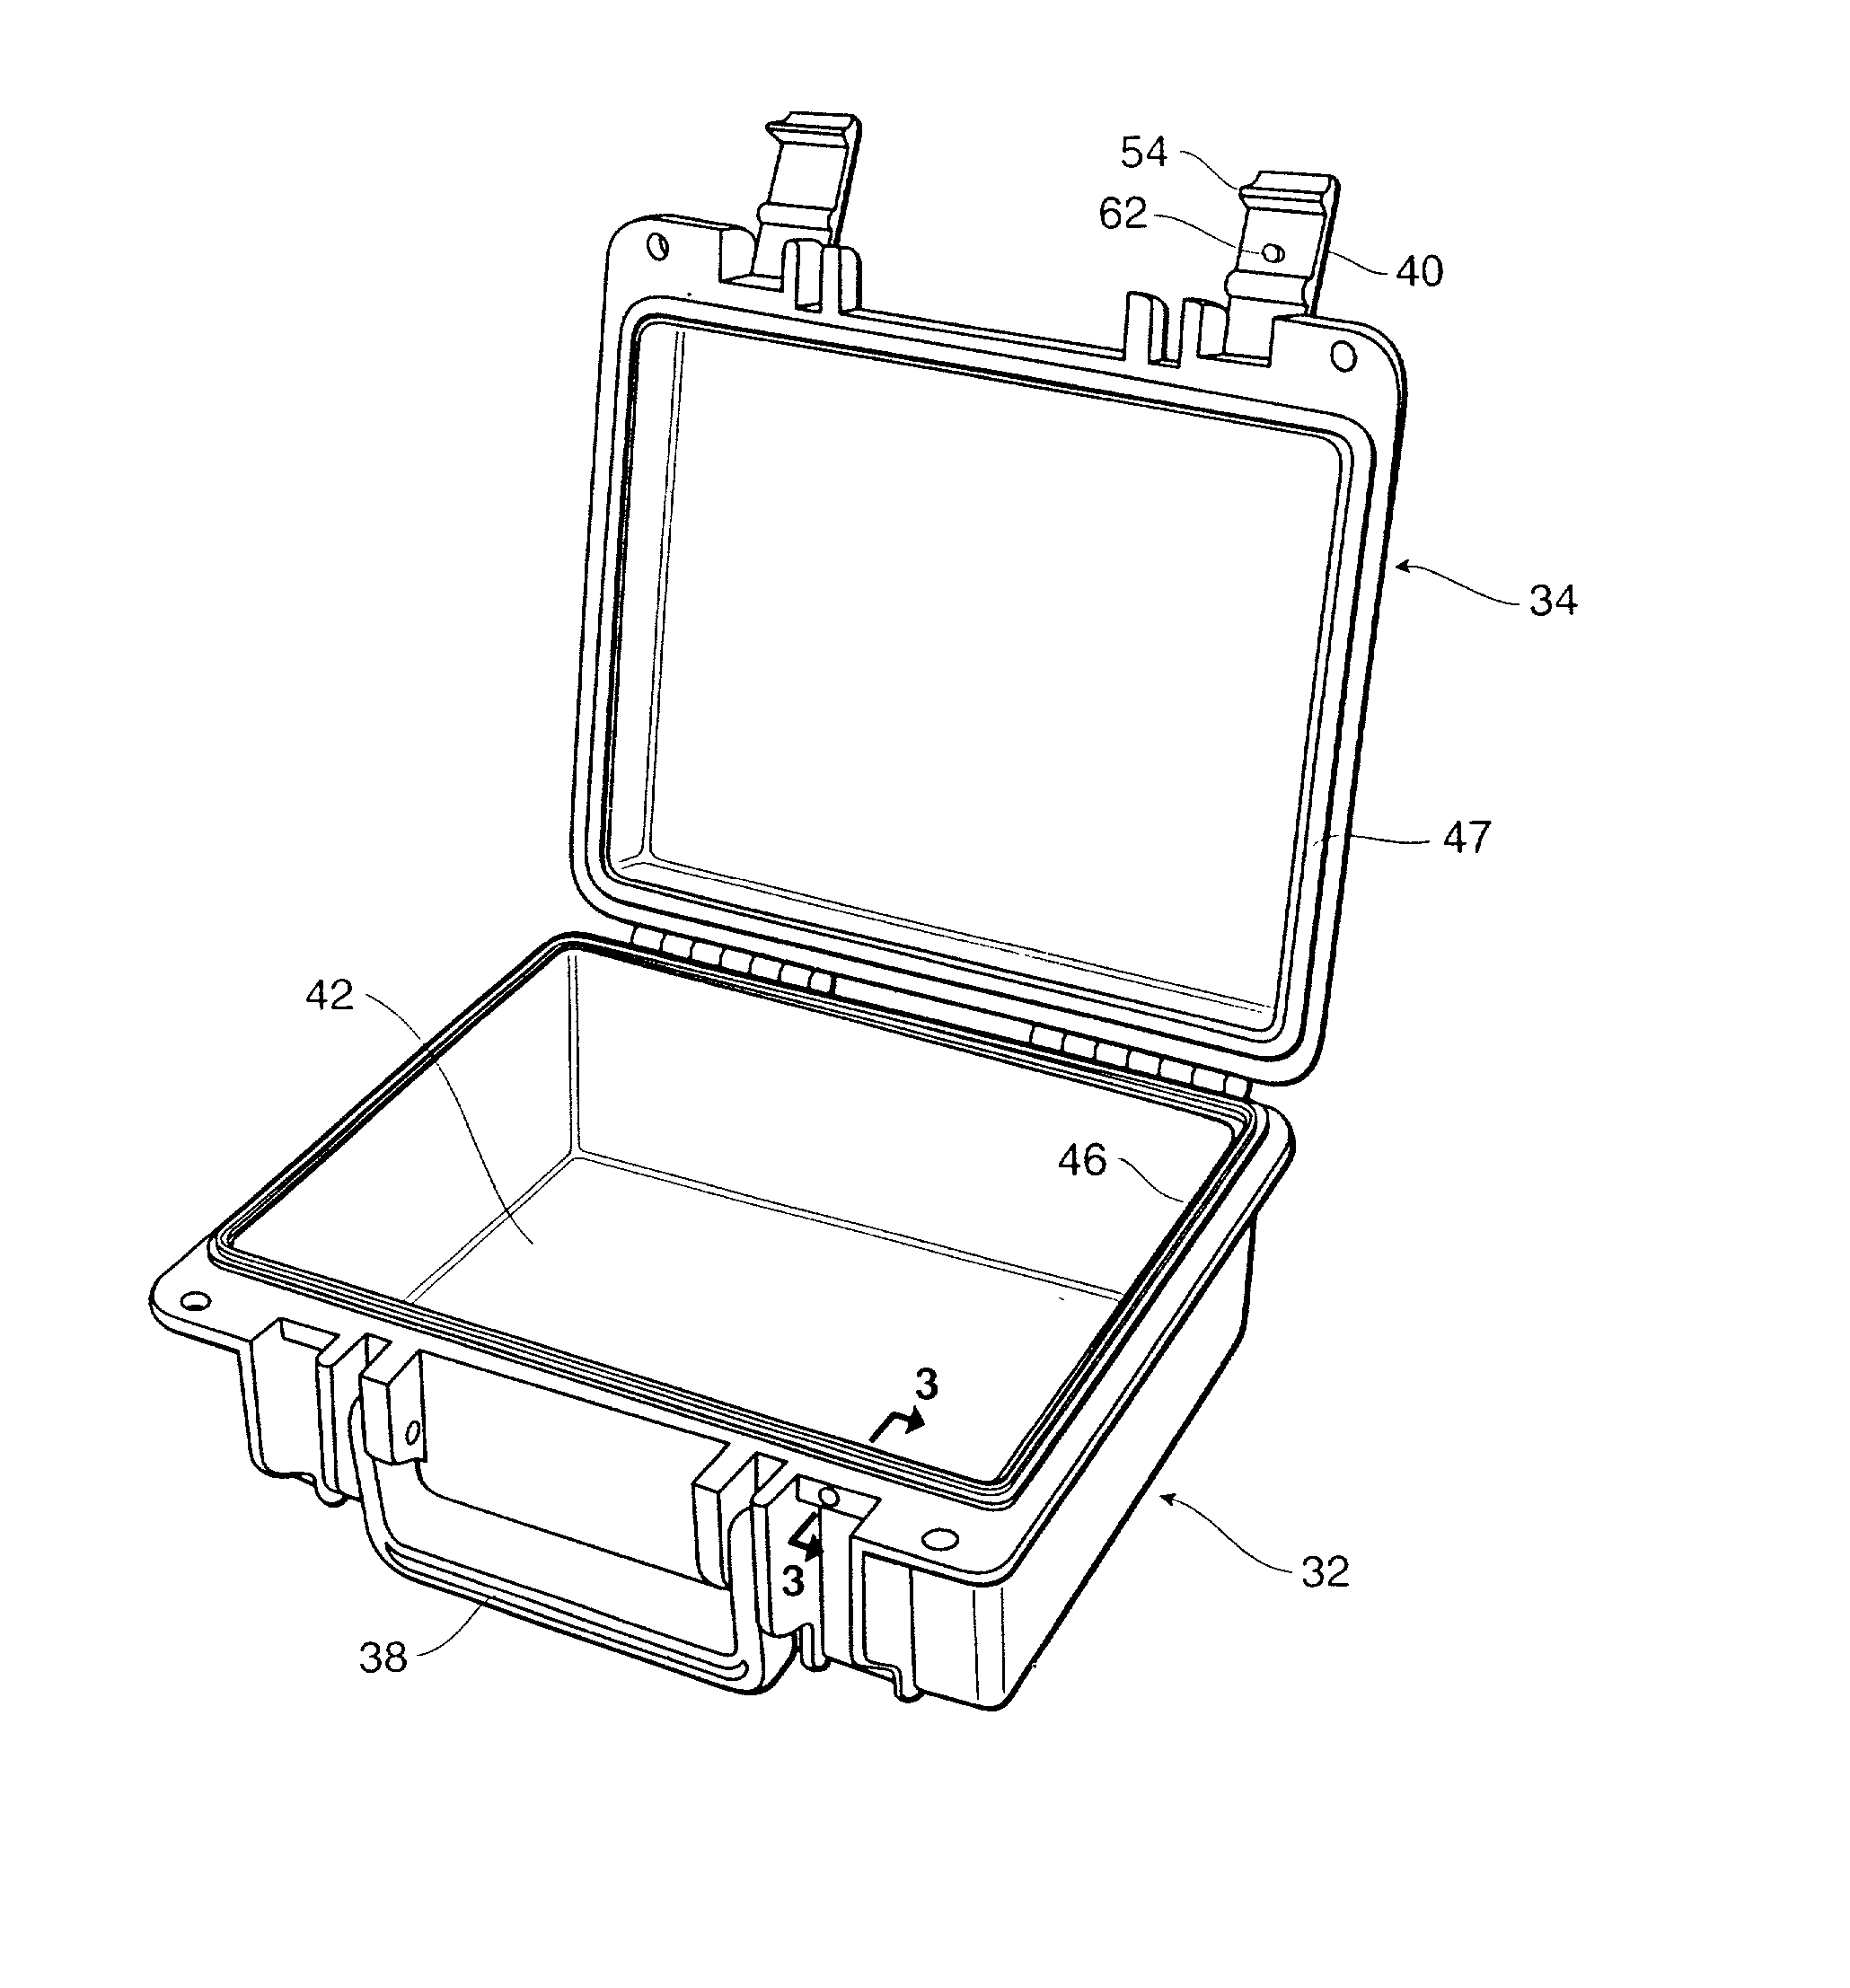 Air sealable container with automatically actuable pressure equalizing valve